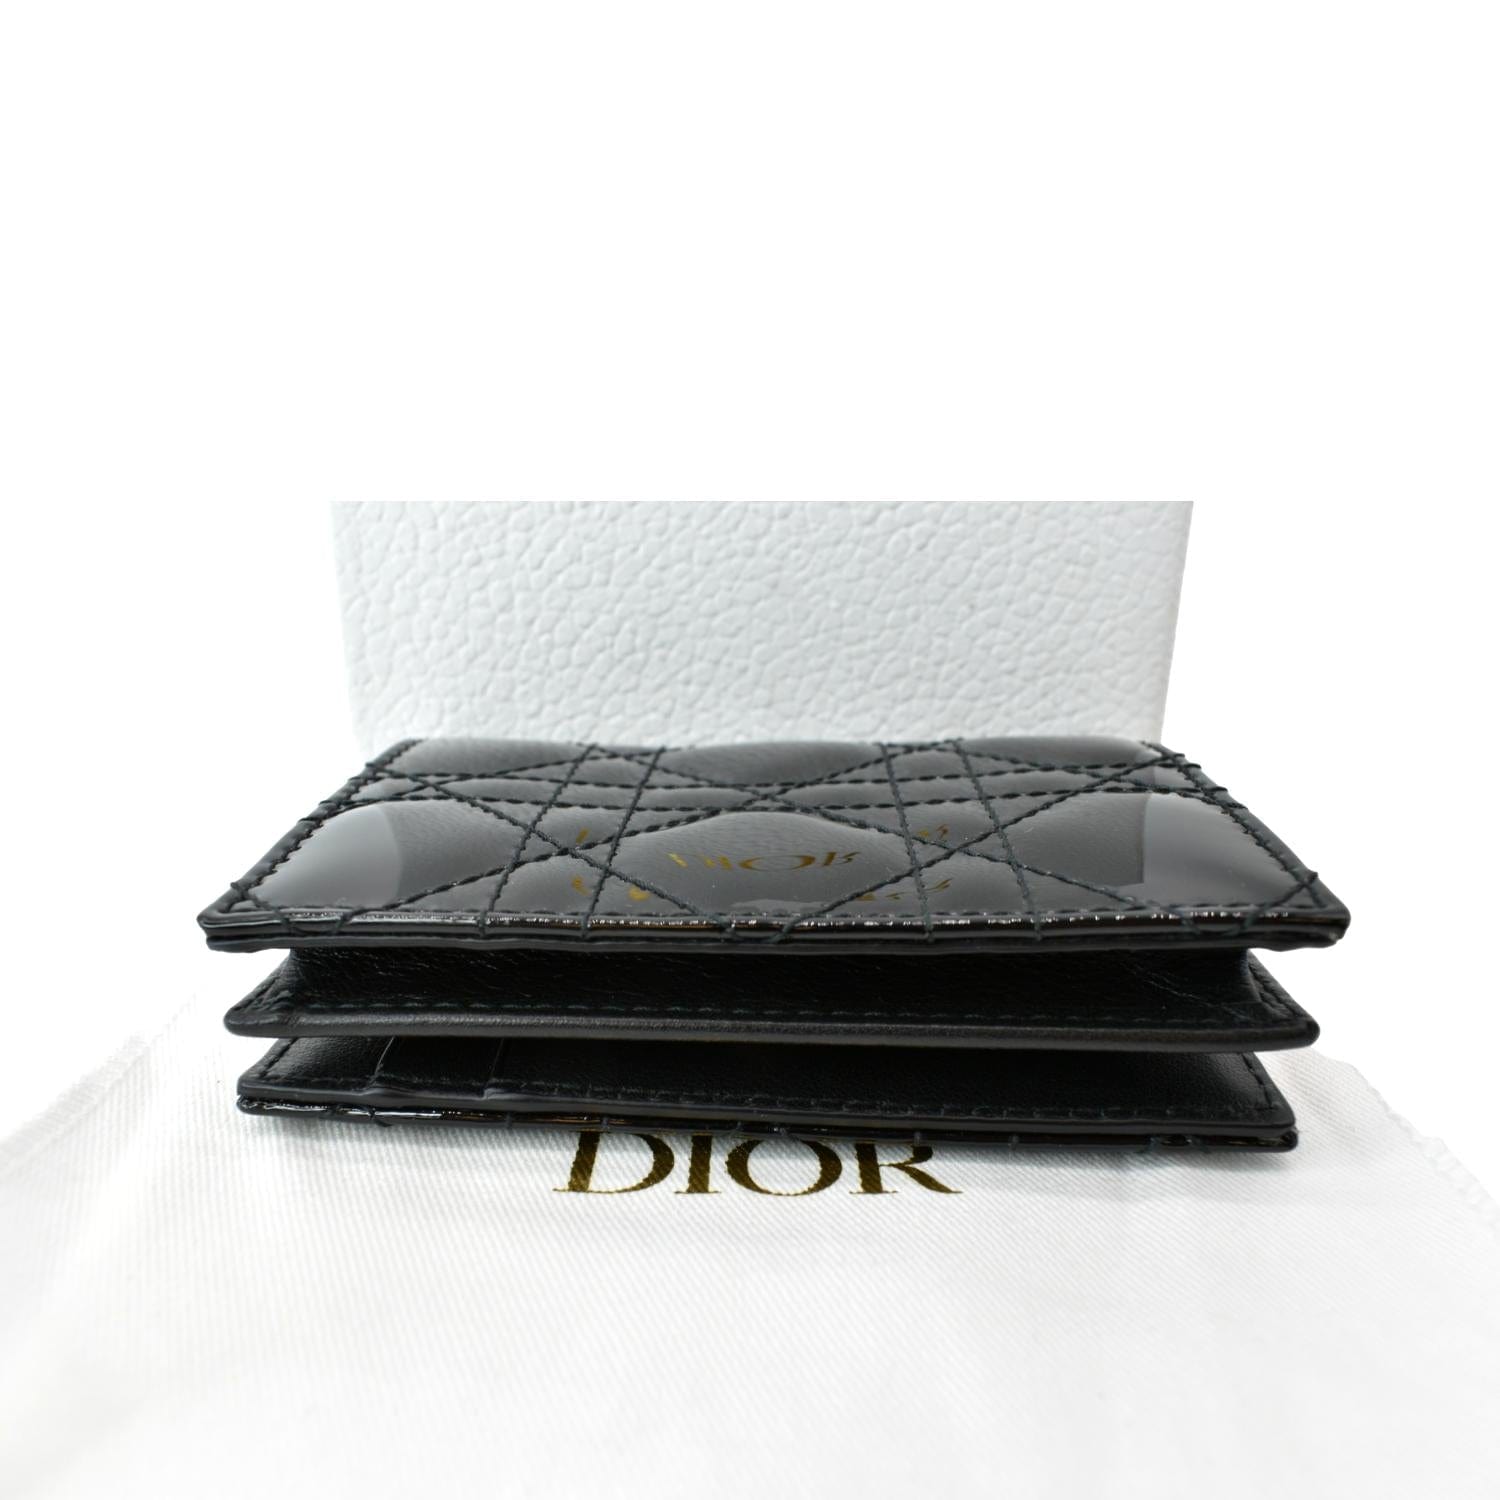 CHRISTIAN DIOR Patent Cannage Mini Lady Dior Wallet